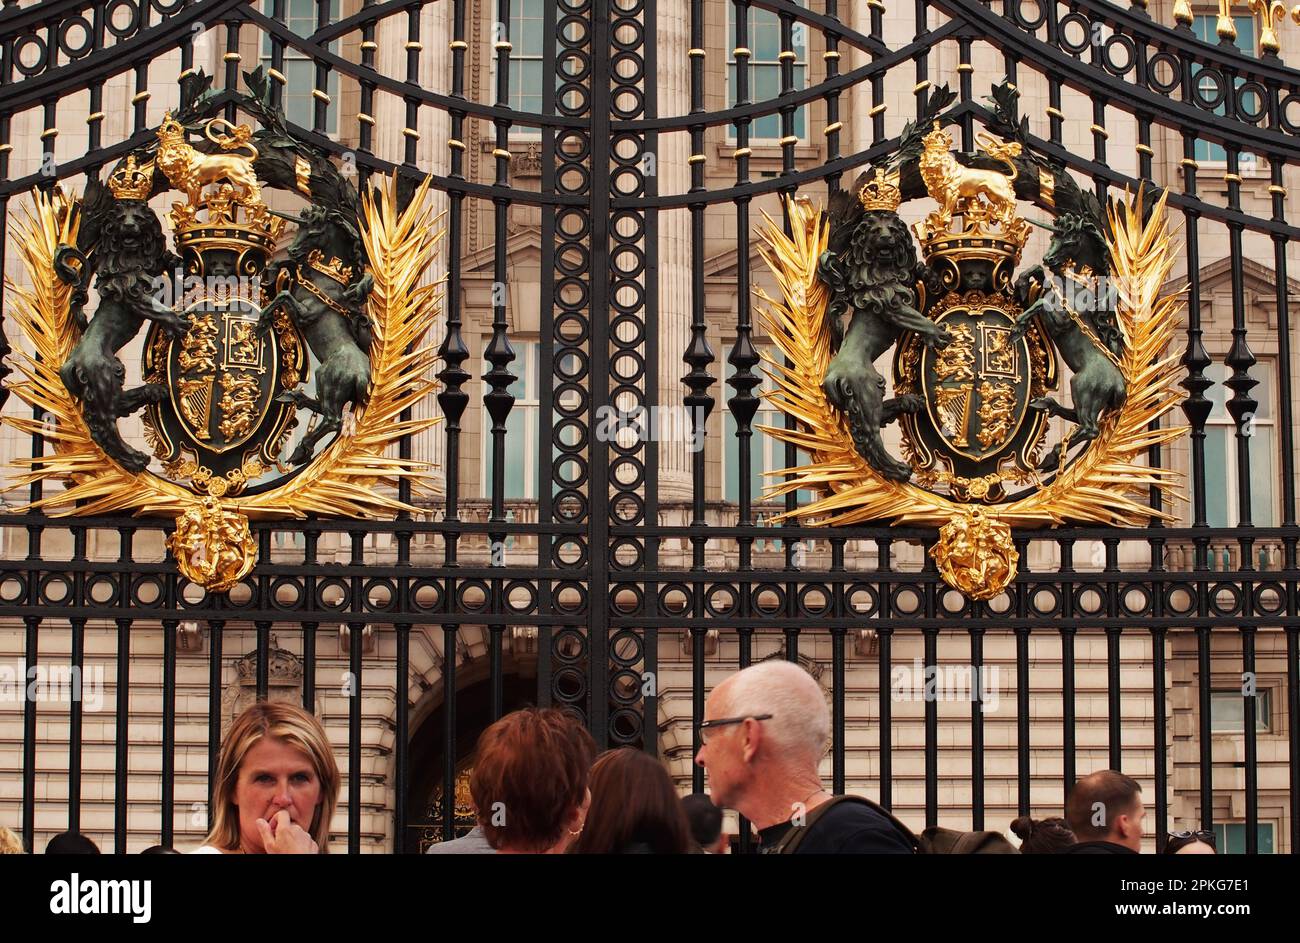 A few people outside the gates of Buckingham Palace, London, England. UK after the death of Queen Elizabeth11 Stock Photo